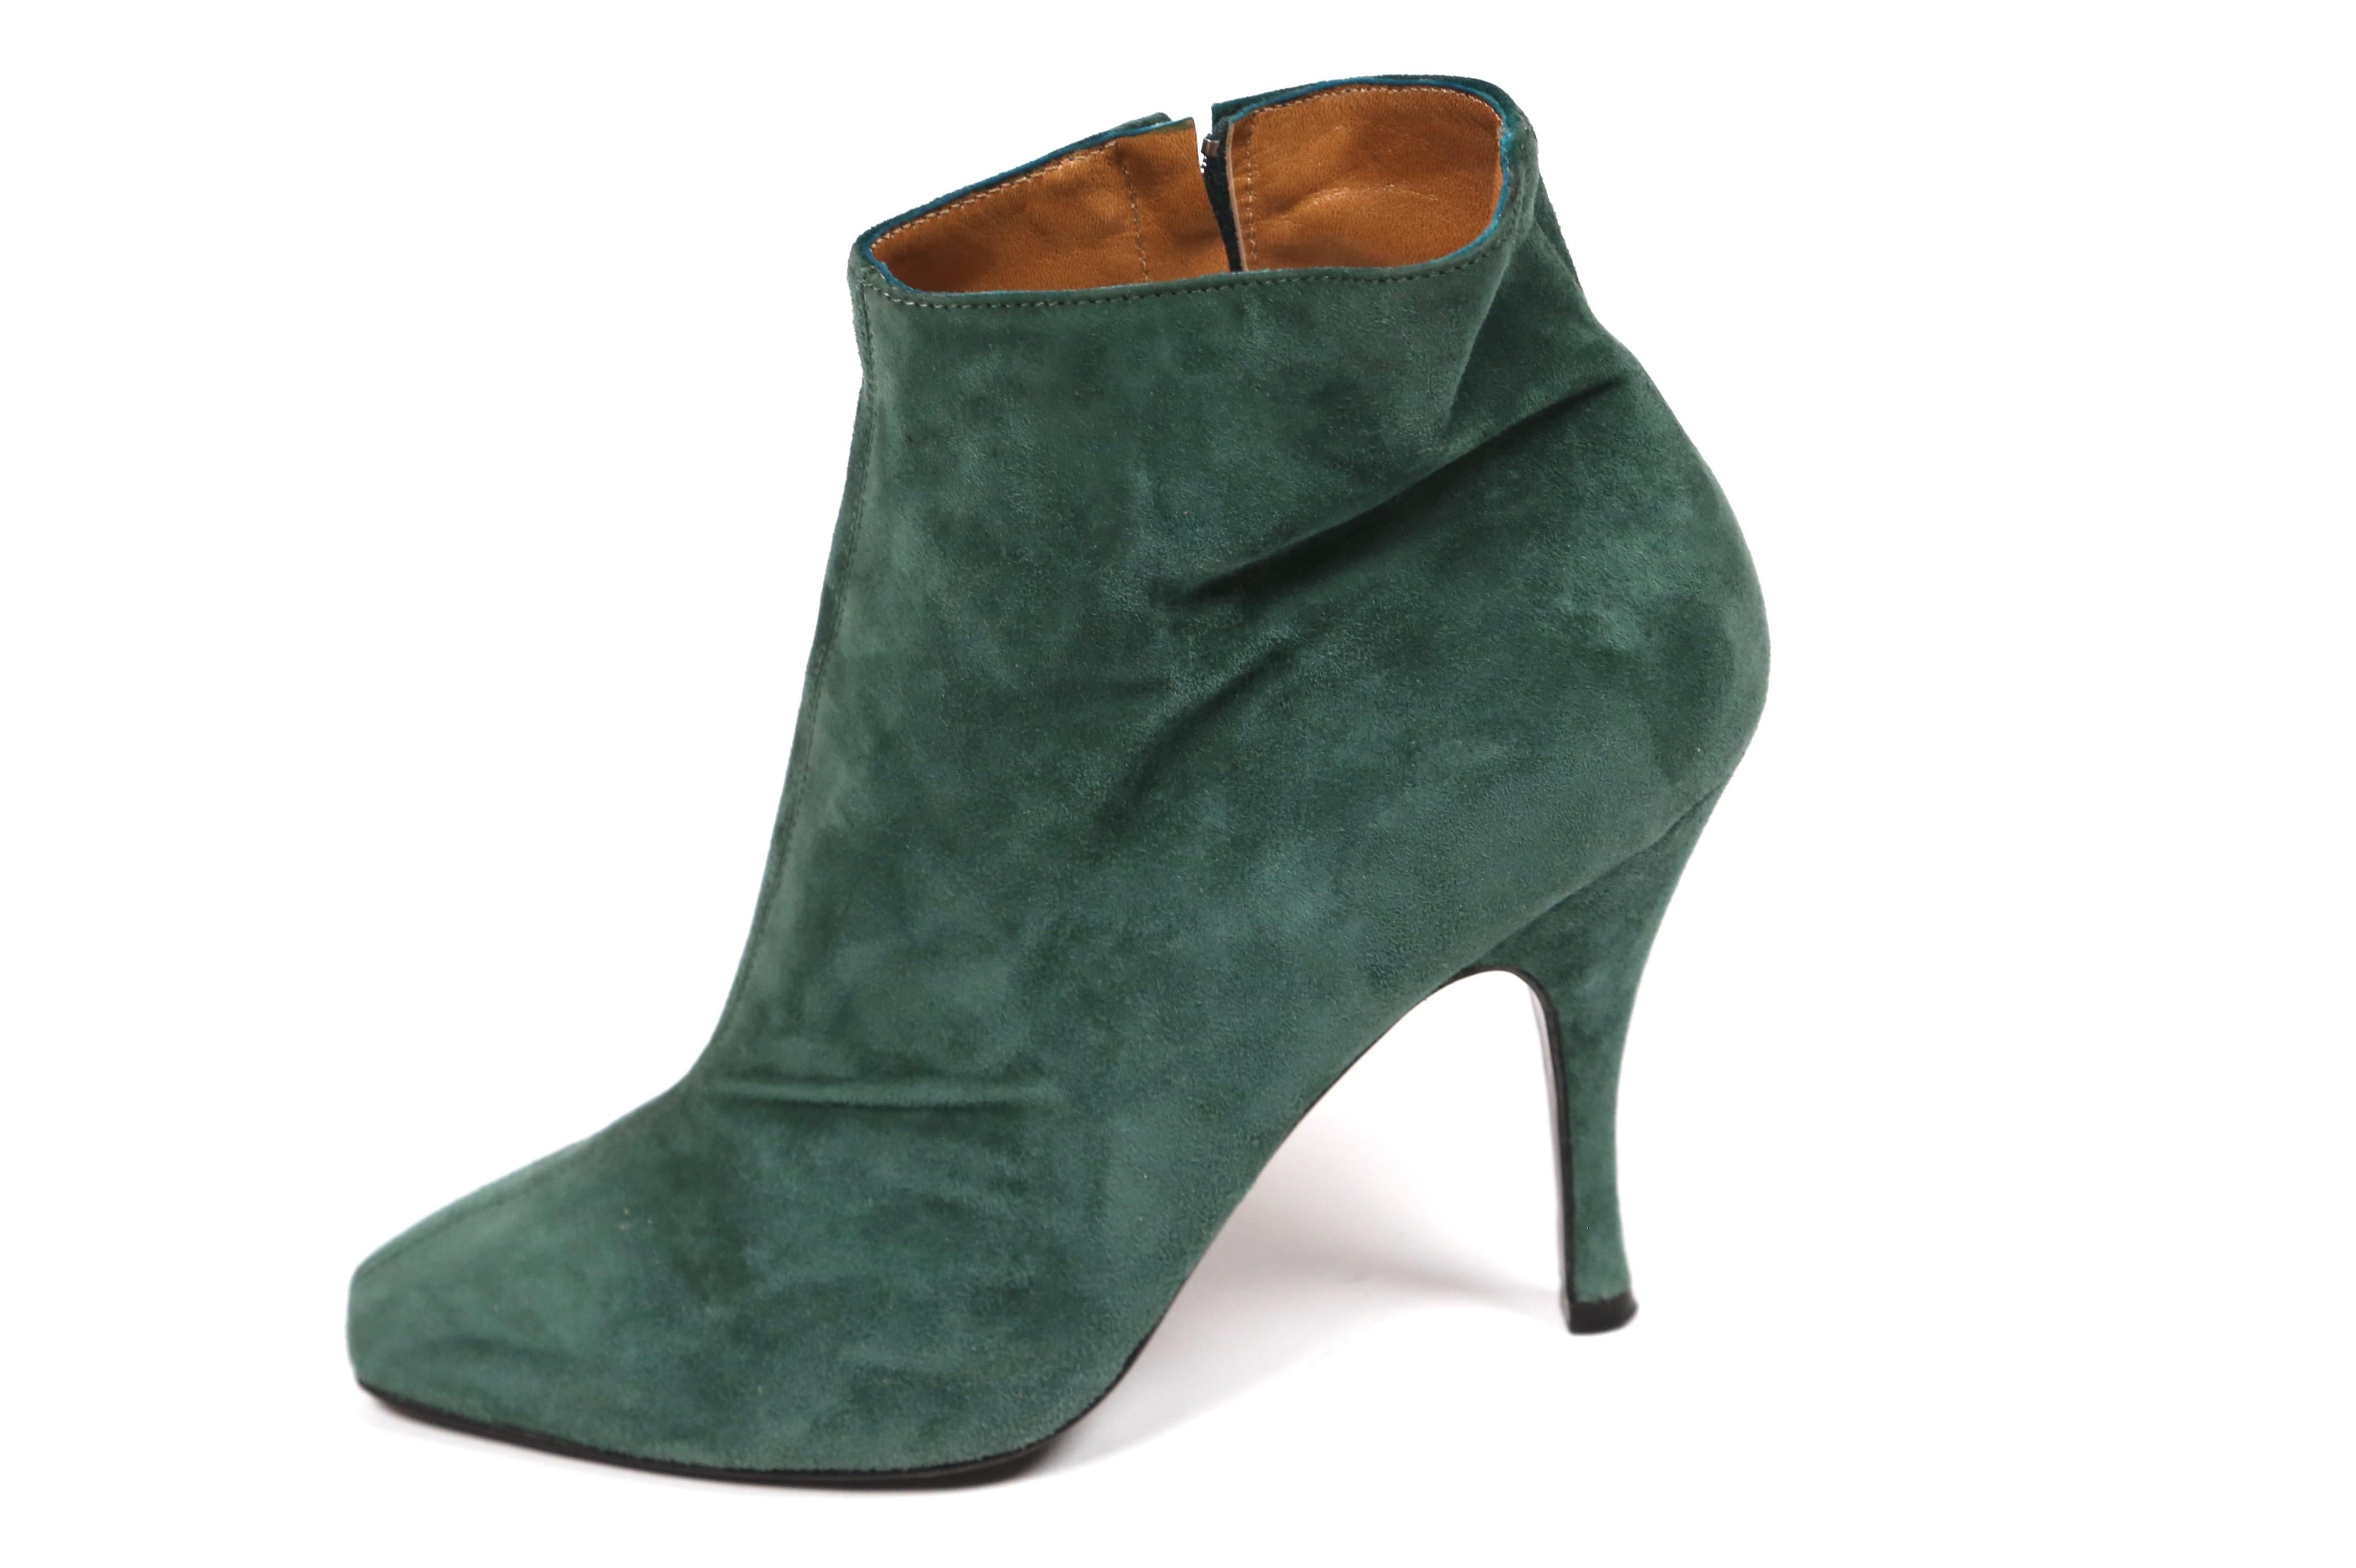 Green suede stiletto ankle boots with almond shaped toe from Azzedine Alaia dating to the 1990's. Size 40 (approximately fits a modern US 9-9.5). Inside zips. Composed entirely of leather. Made in France. Good condition. Also available in black.
